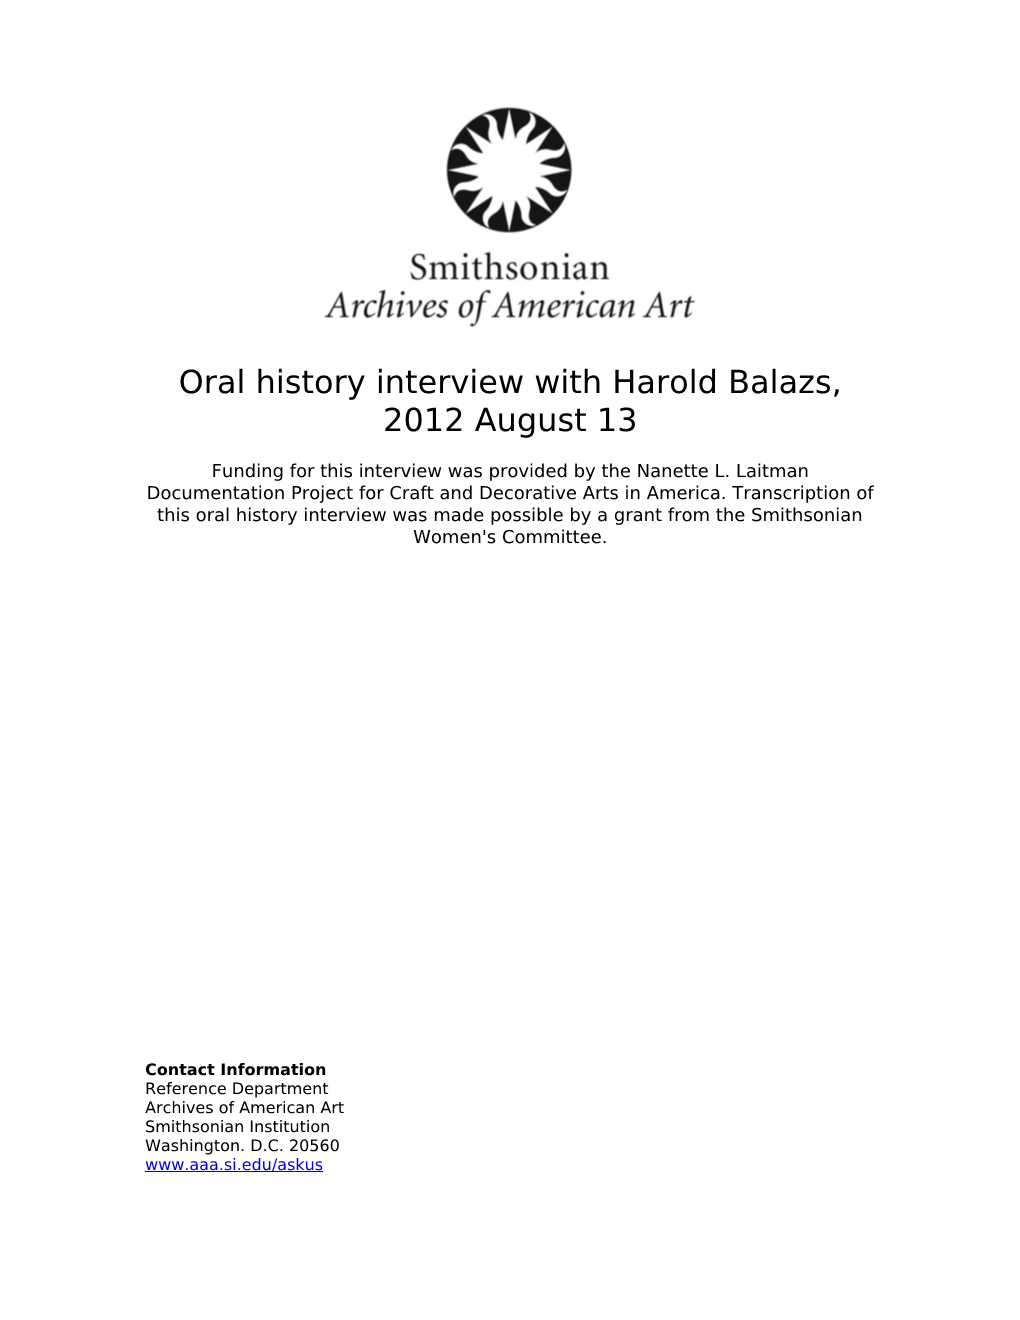 Oral History Interview with Harold Balazs, 2012 August 13